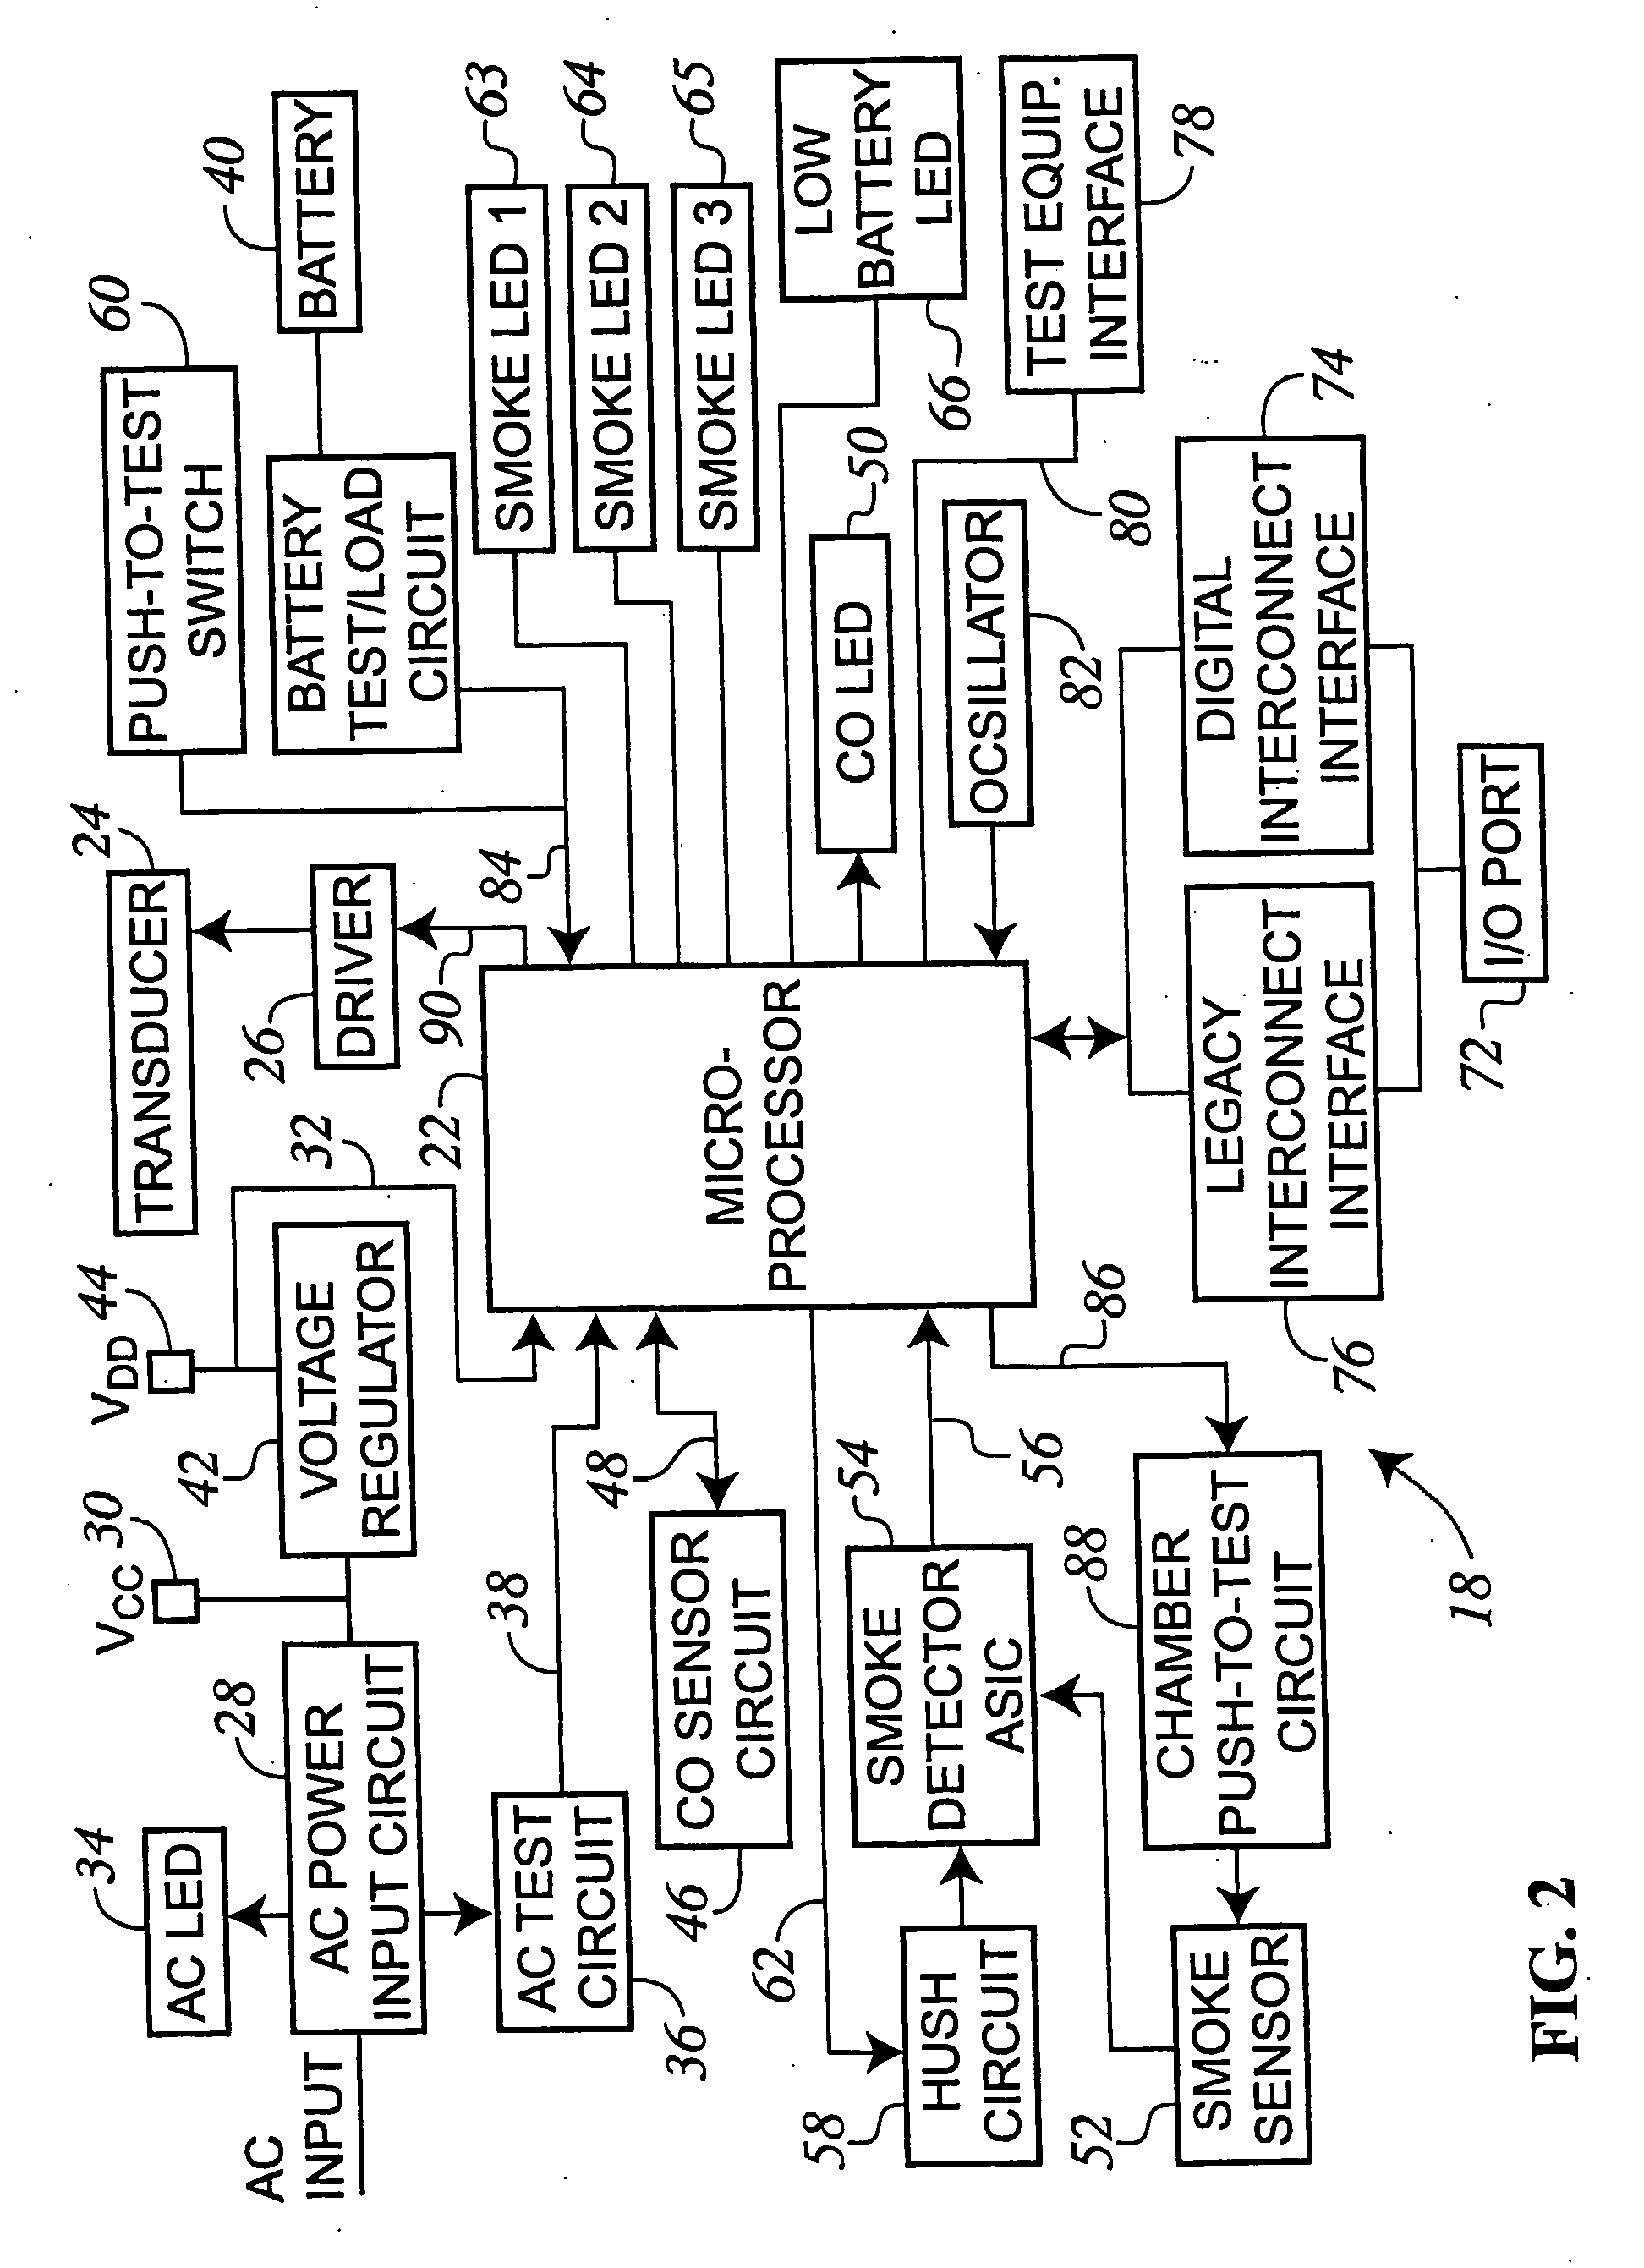 Enhanced visual signaling for an adverse condition detector